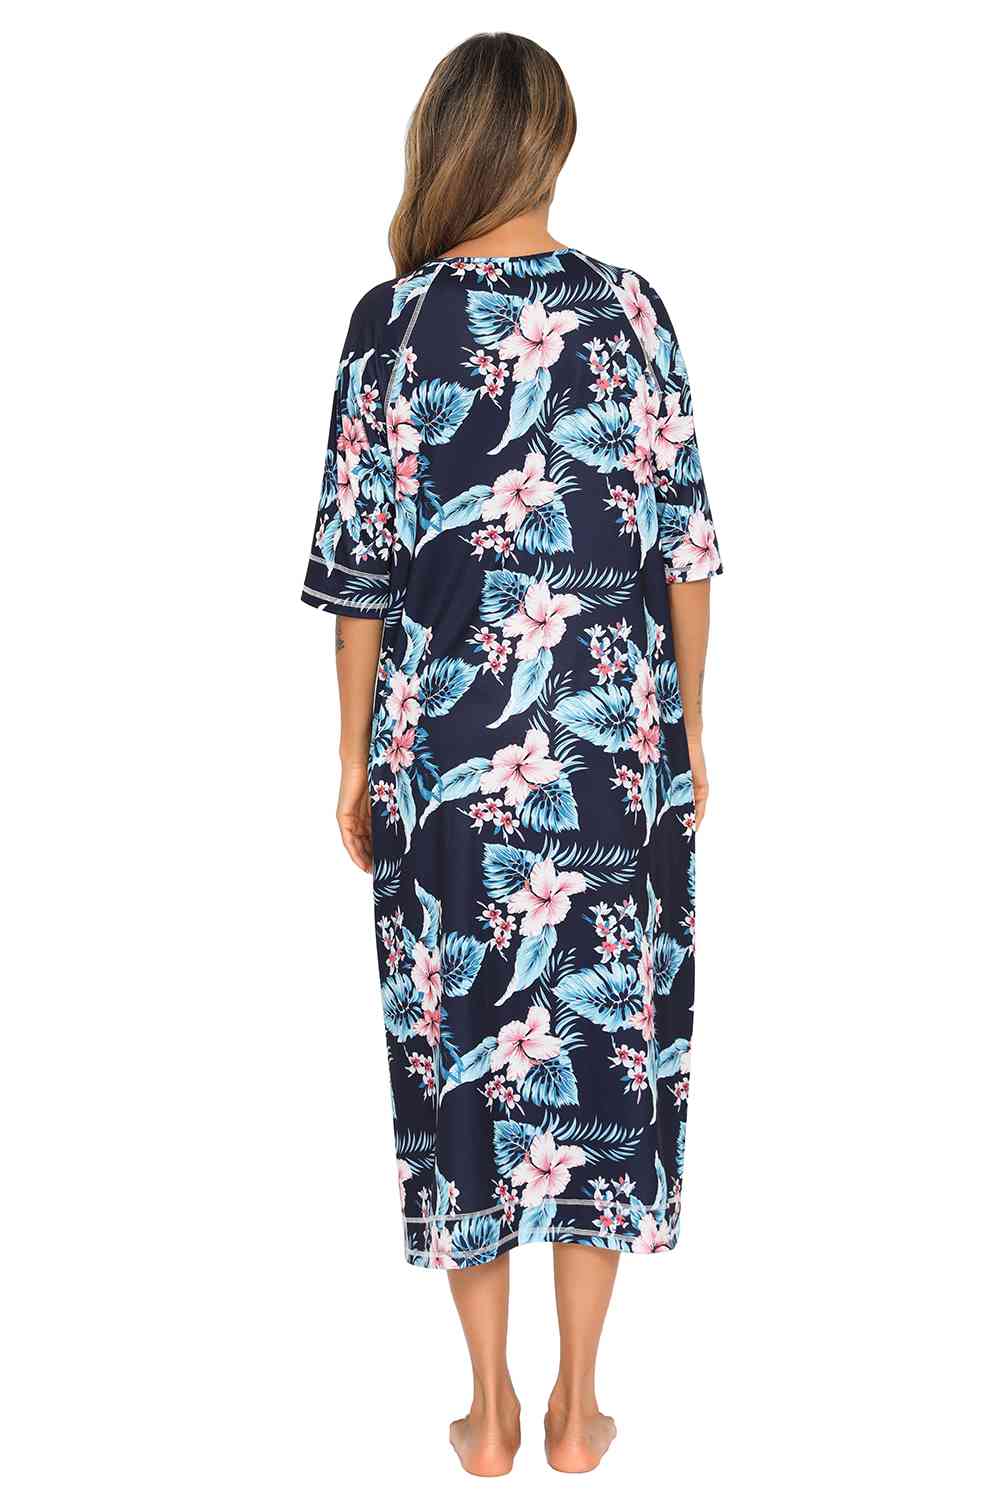 Printed Slit Night Dress with Pockets king-general-store-5710.myshopify.com